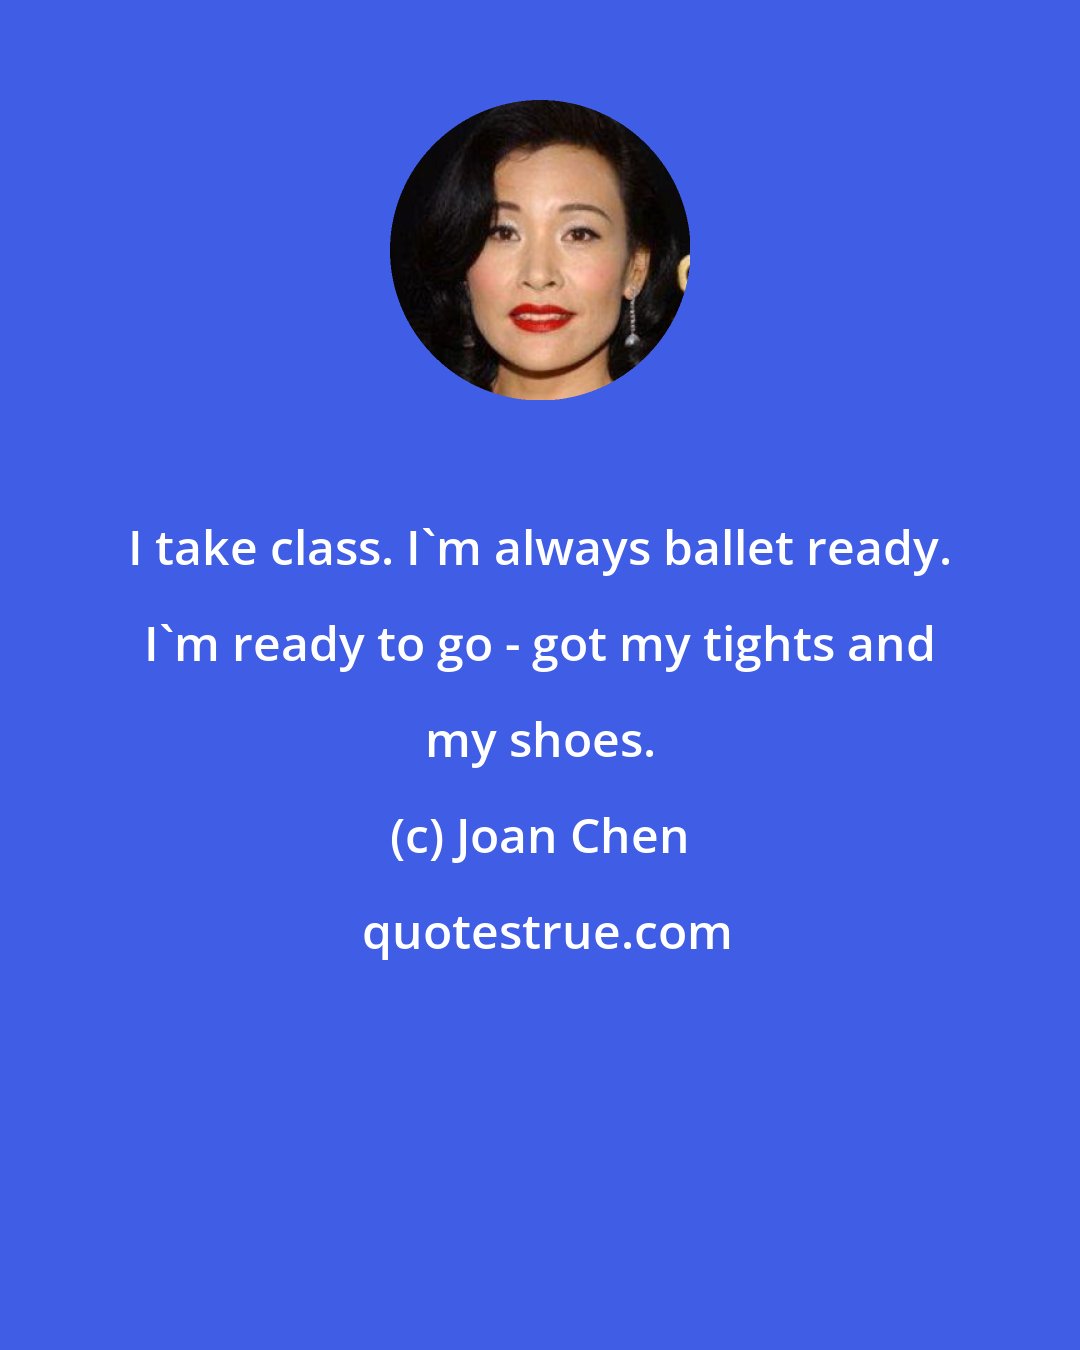 Joan Chen: I take class. I'm always ballet ready. I'm ready to go - got my tights and my shoes.